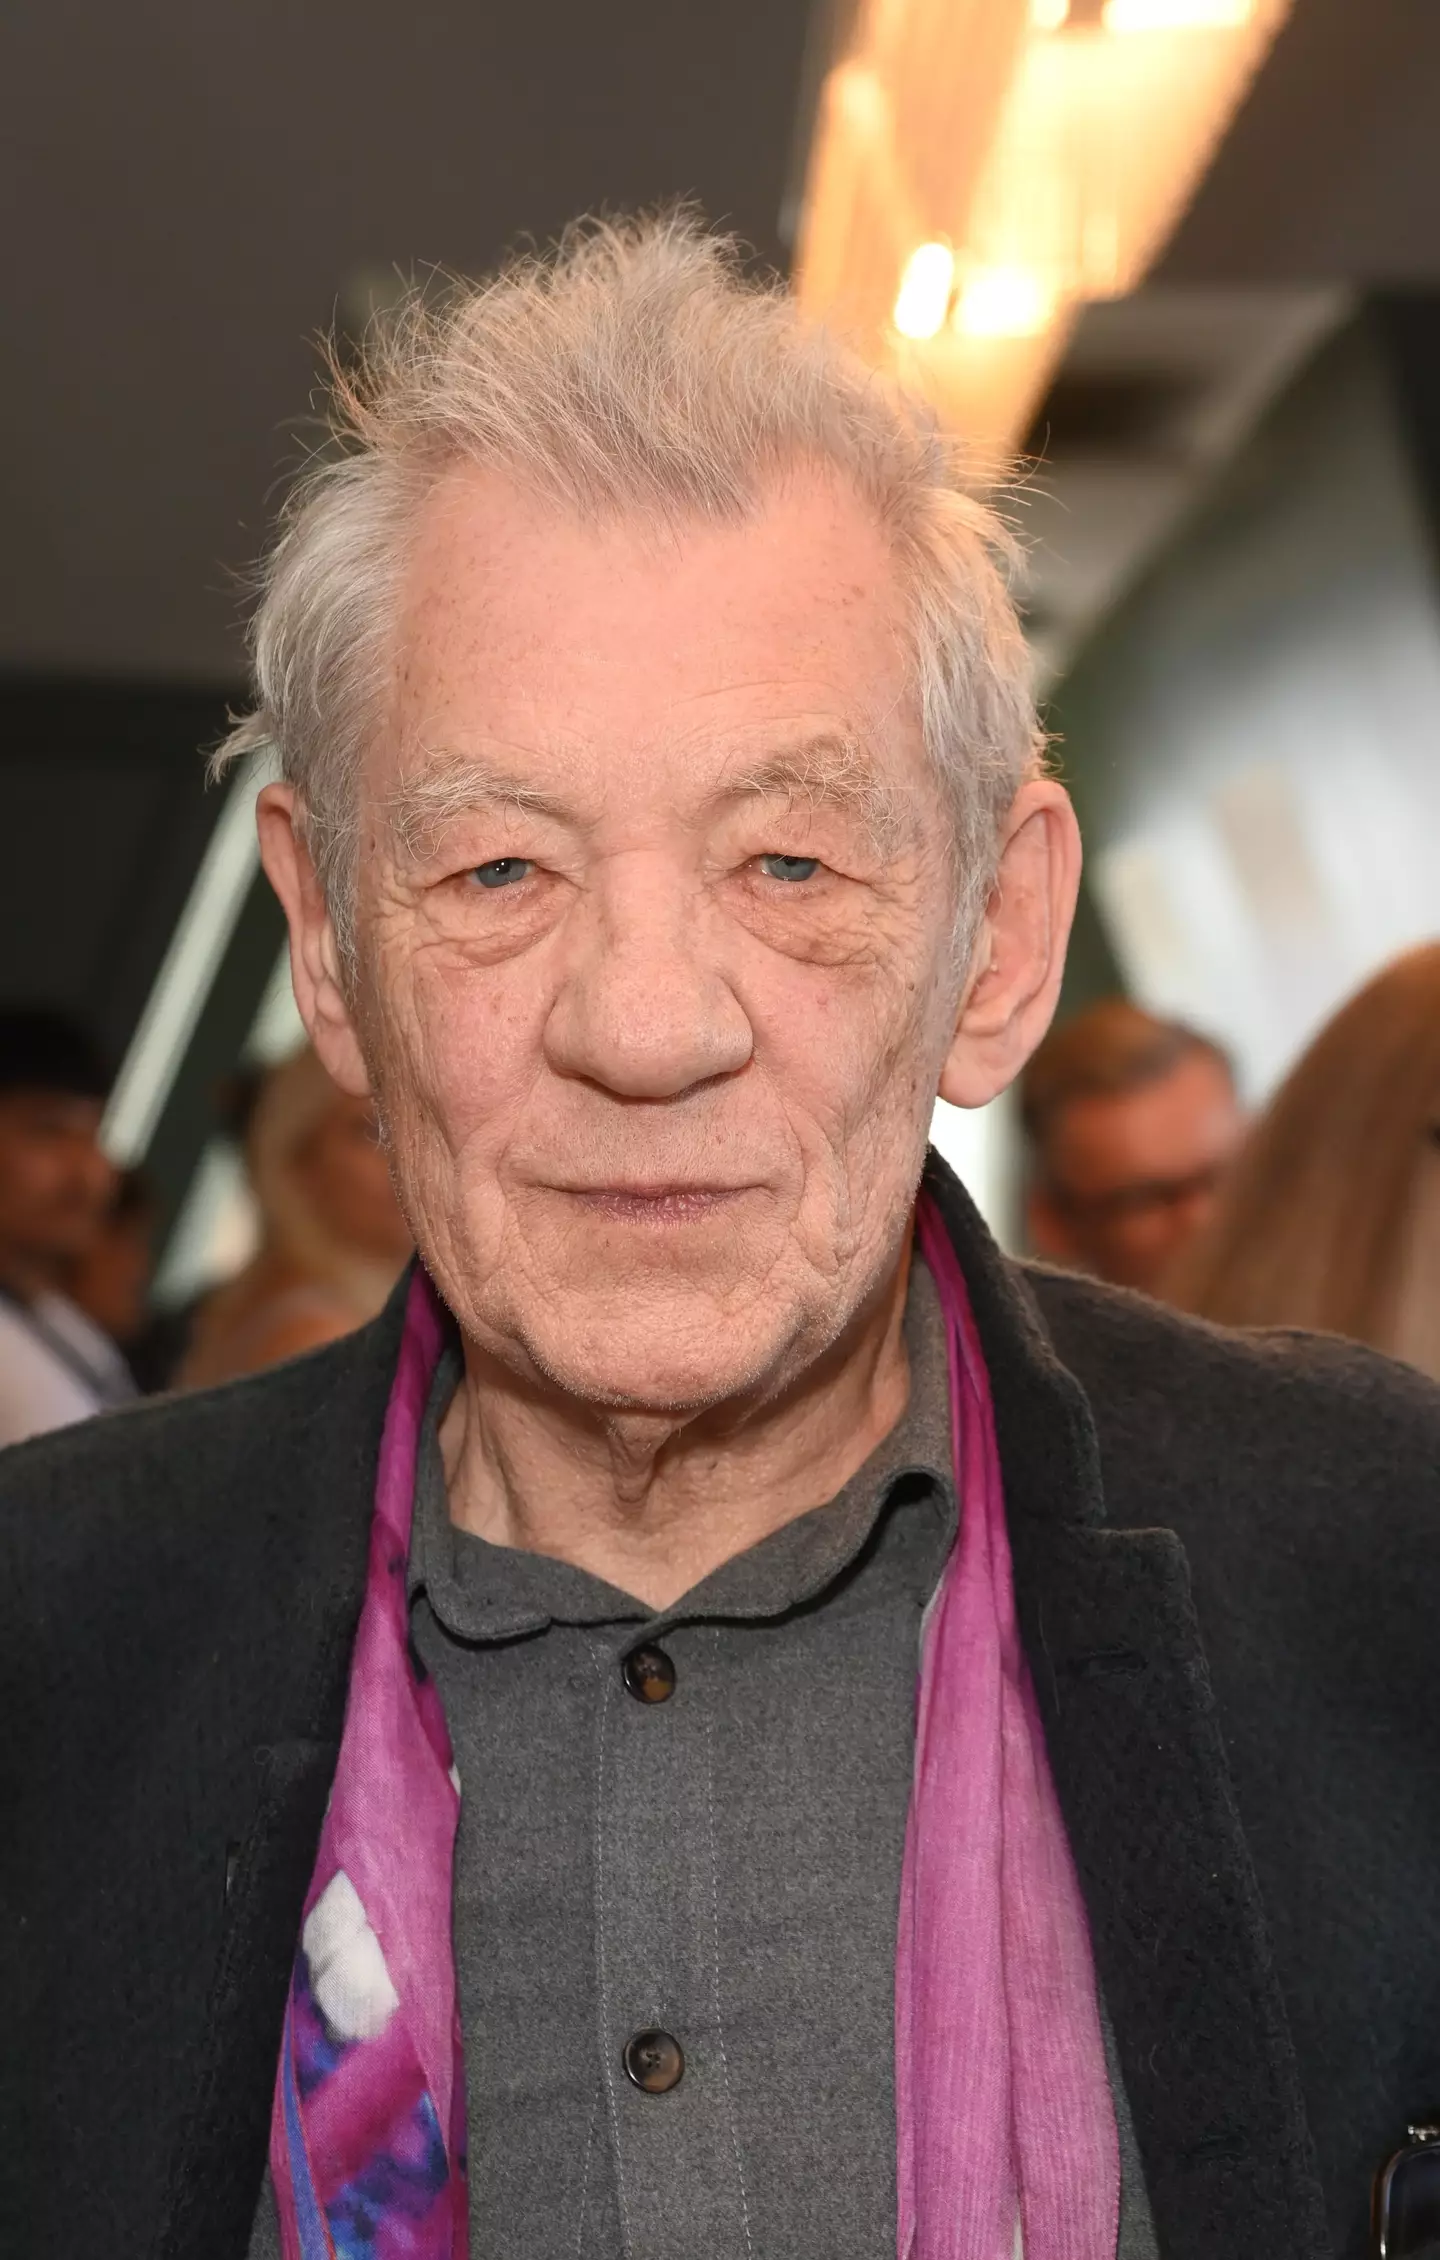 Sir Ian McKellen revealed why he decided to turn down the role of Dumbledore in Harry Potter.